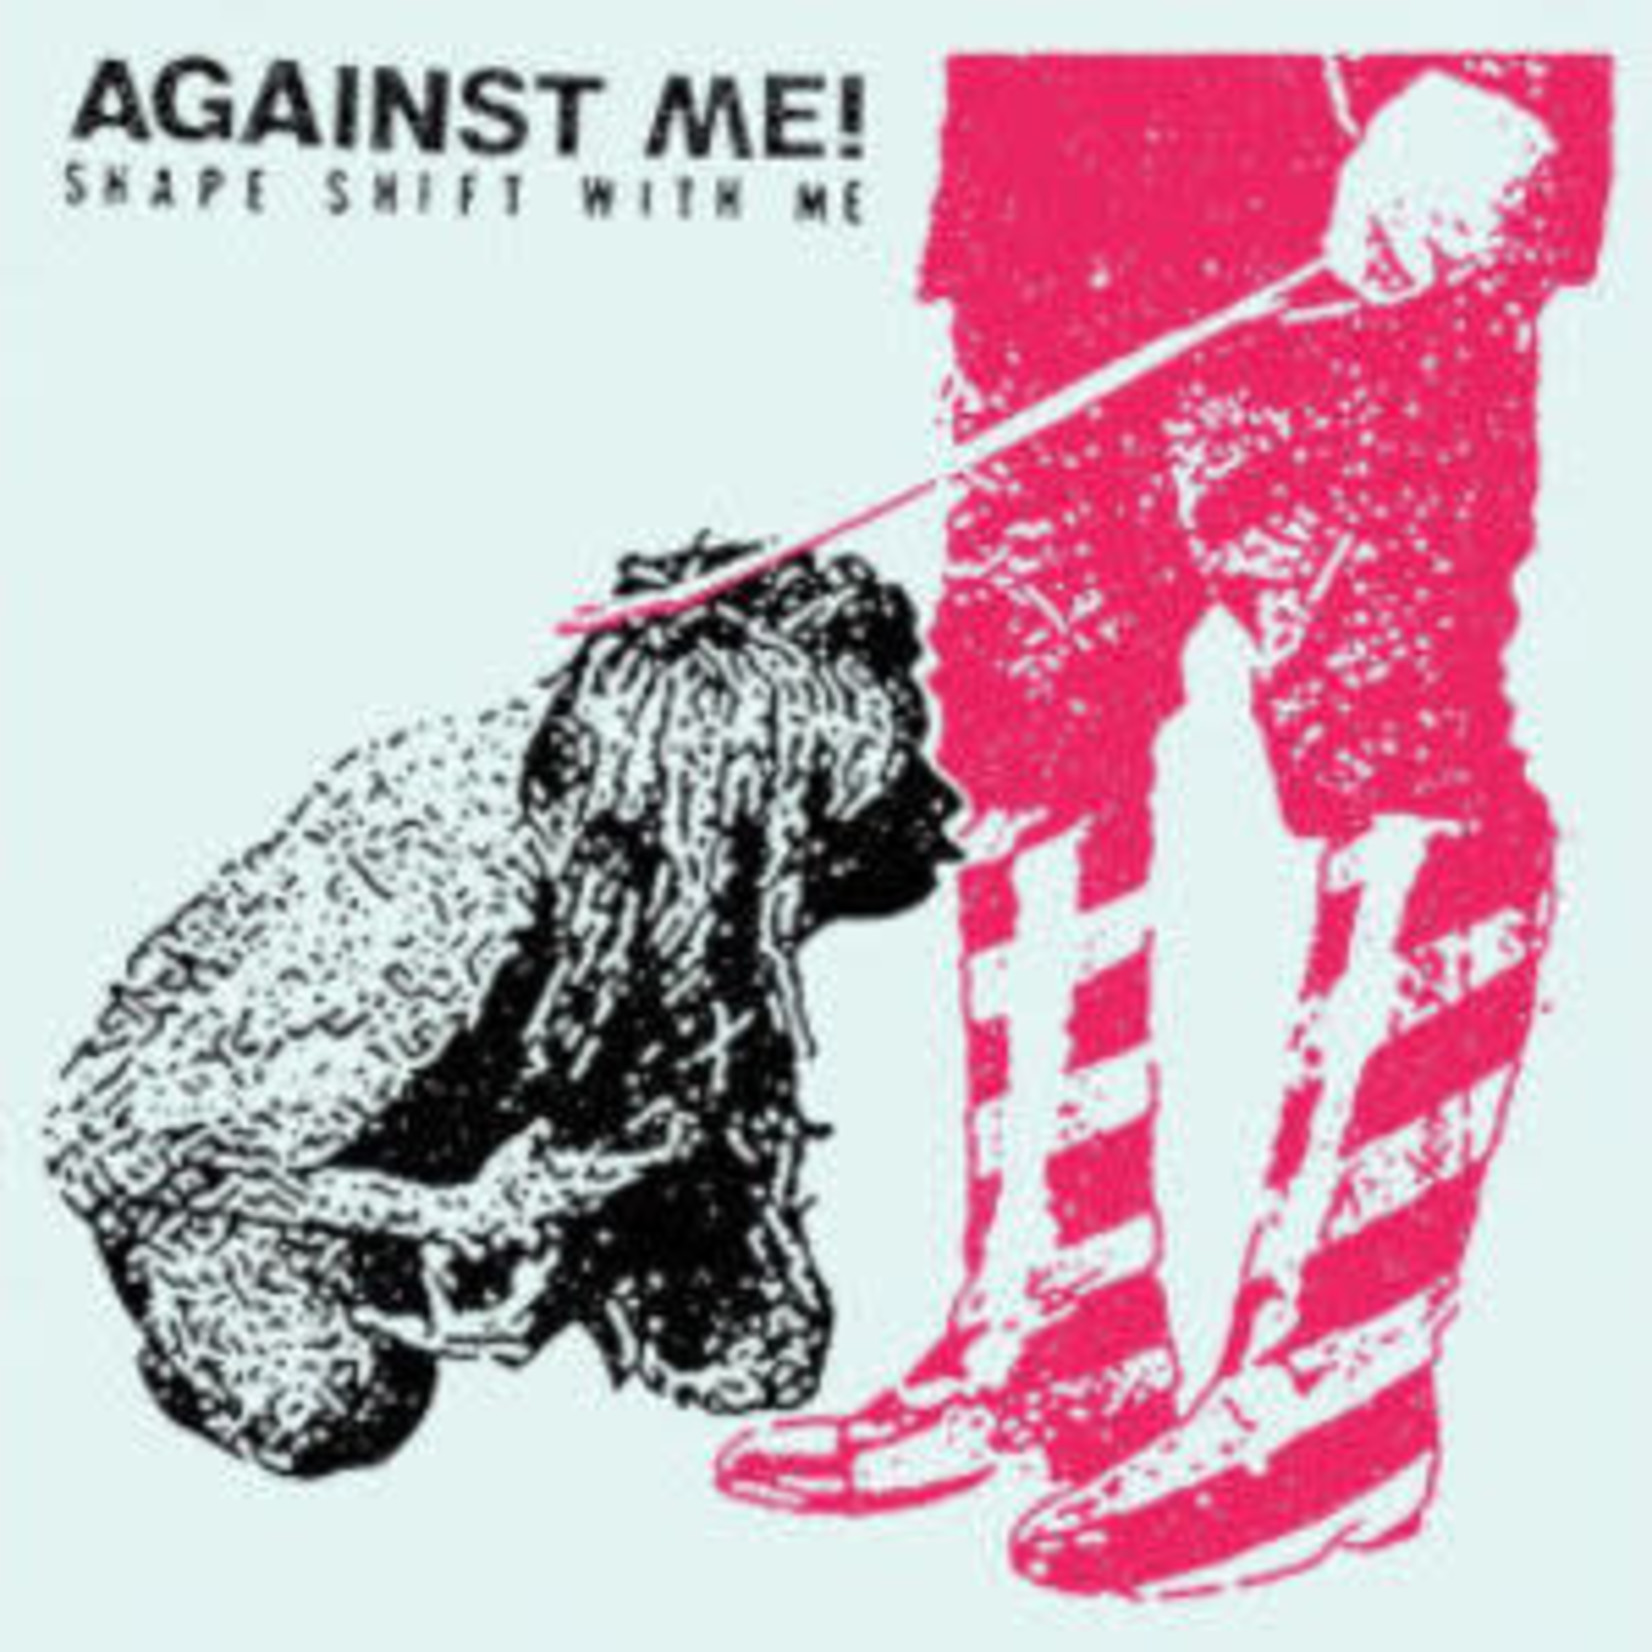 Against Me! - Shape Shift With Me (2LP) [White]